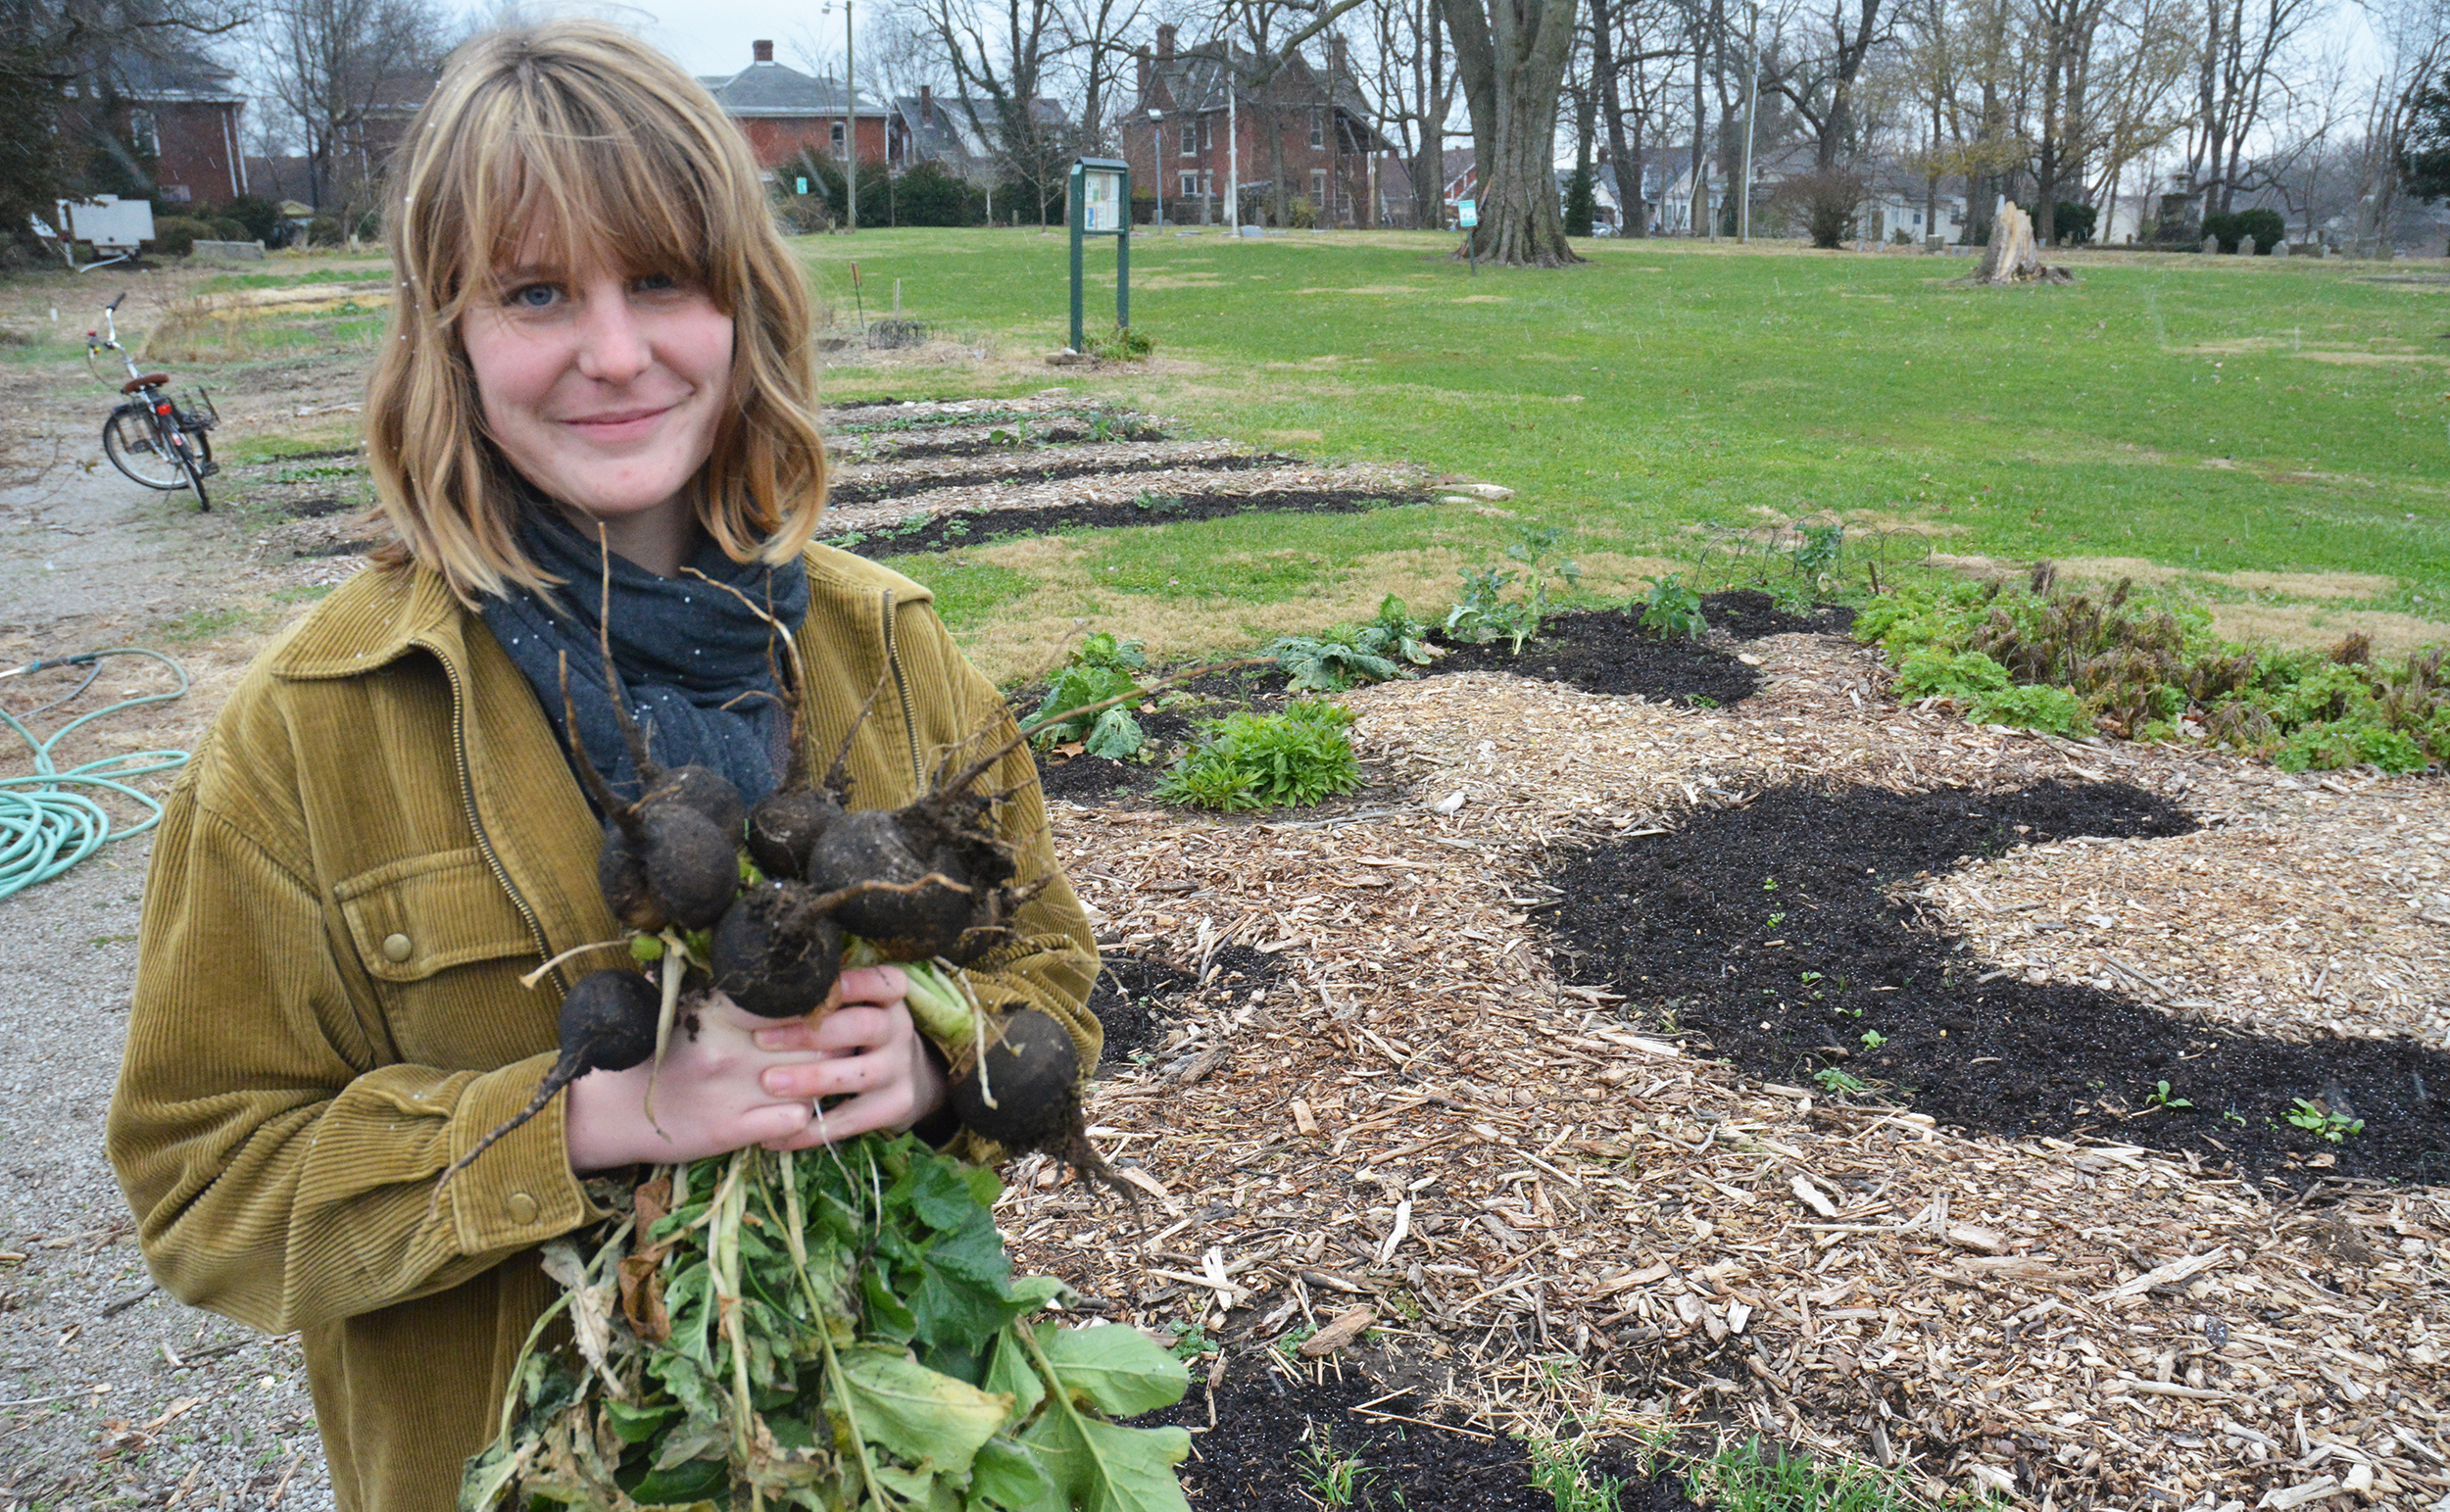 Making Transy’s gardens grow, even in winter